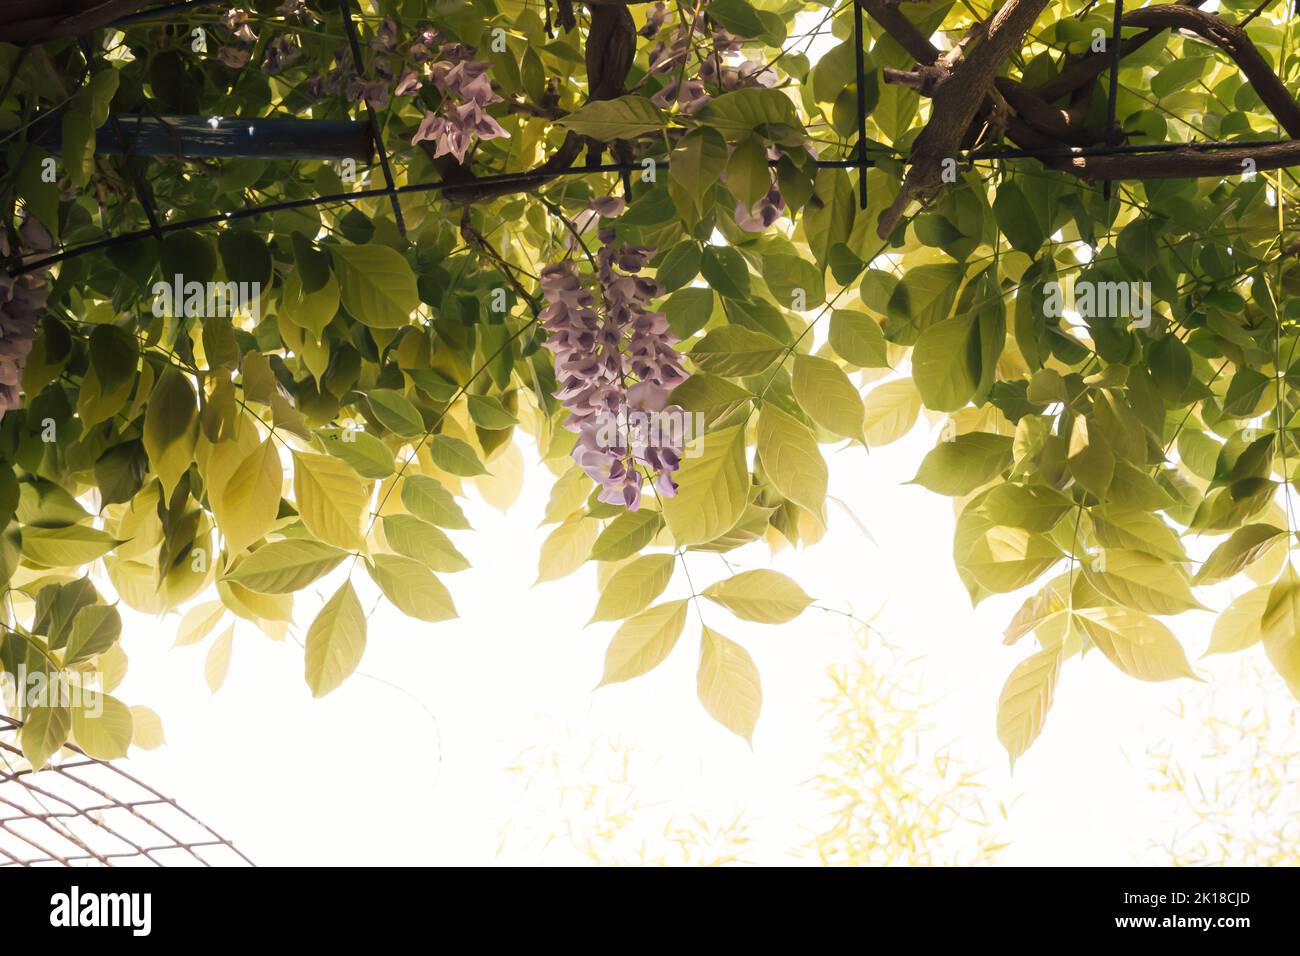 Purple blue wisteria flower with lots of green leaves on a sunny day. Creative background idea. Stock Photo